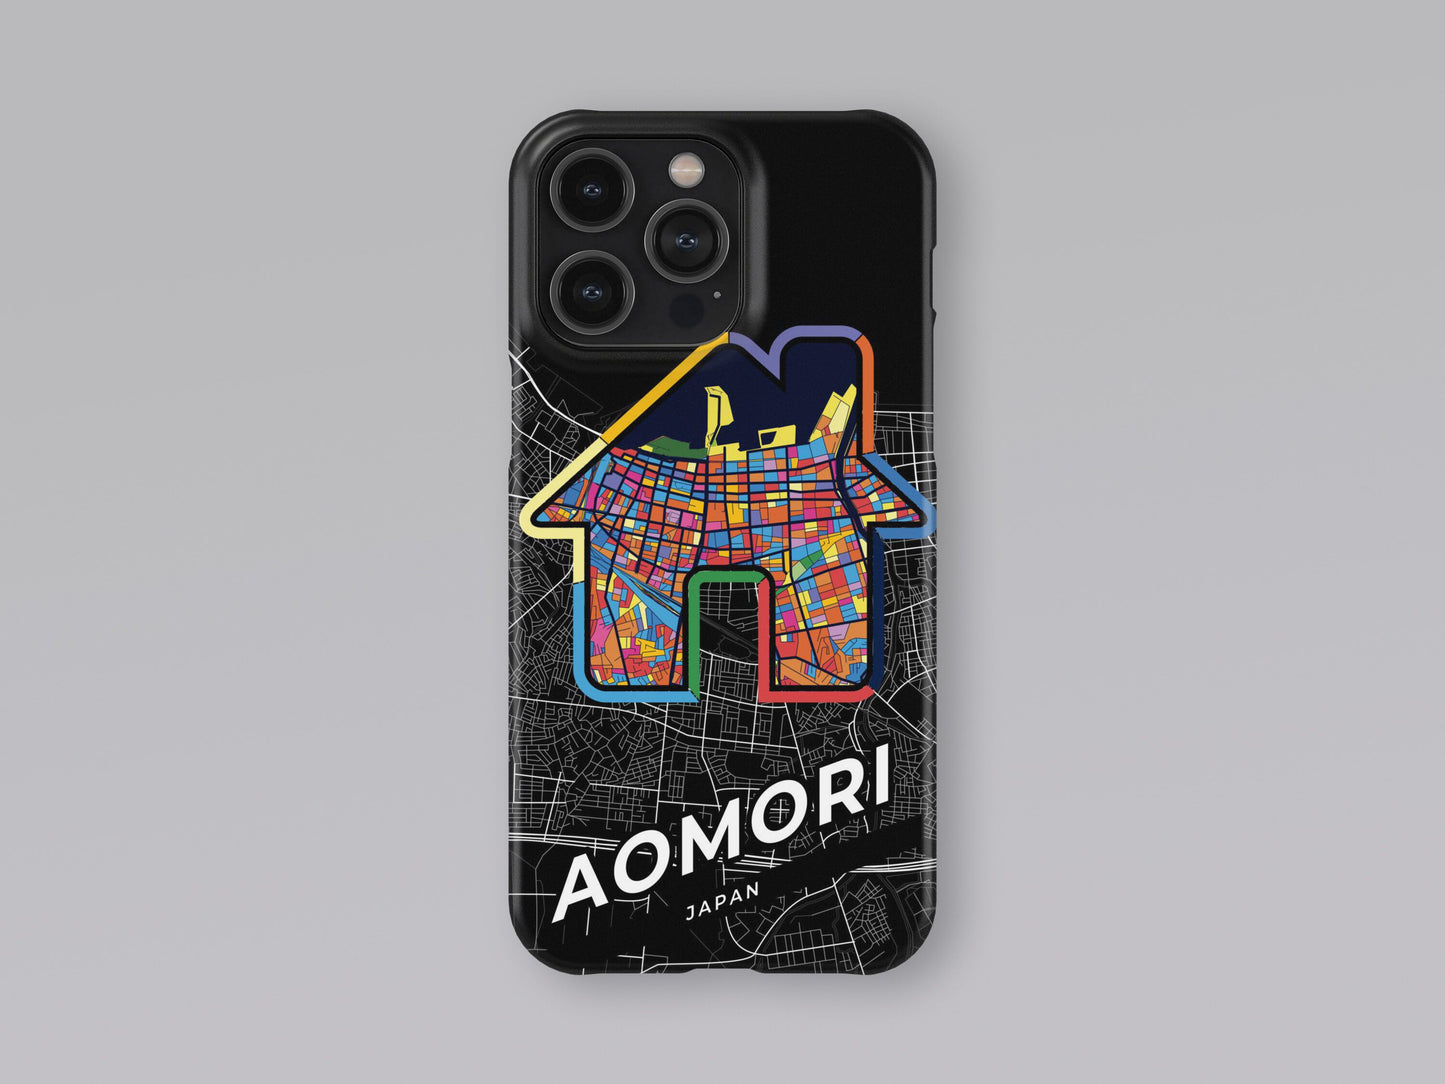 Aomori Japan slim phone case with colorful icon. Birthday, wedding or housewarming gift. Couple match cases. 3